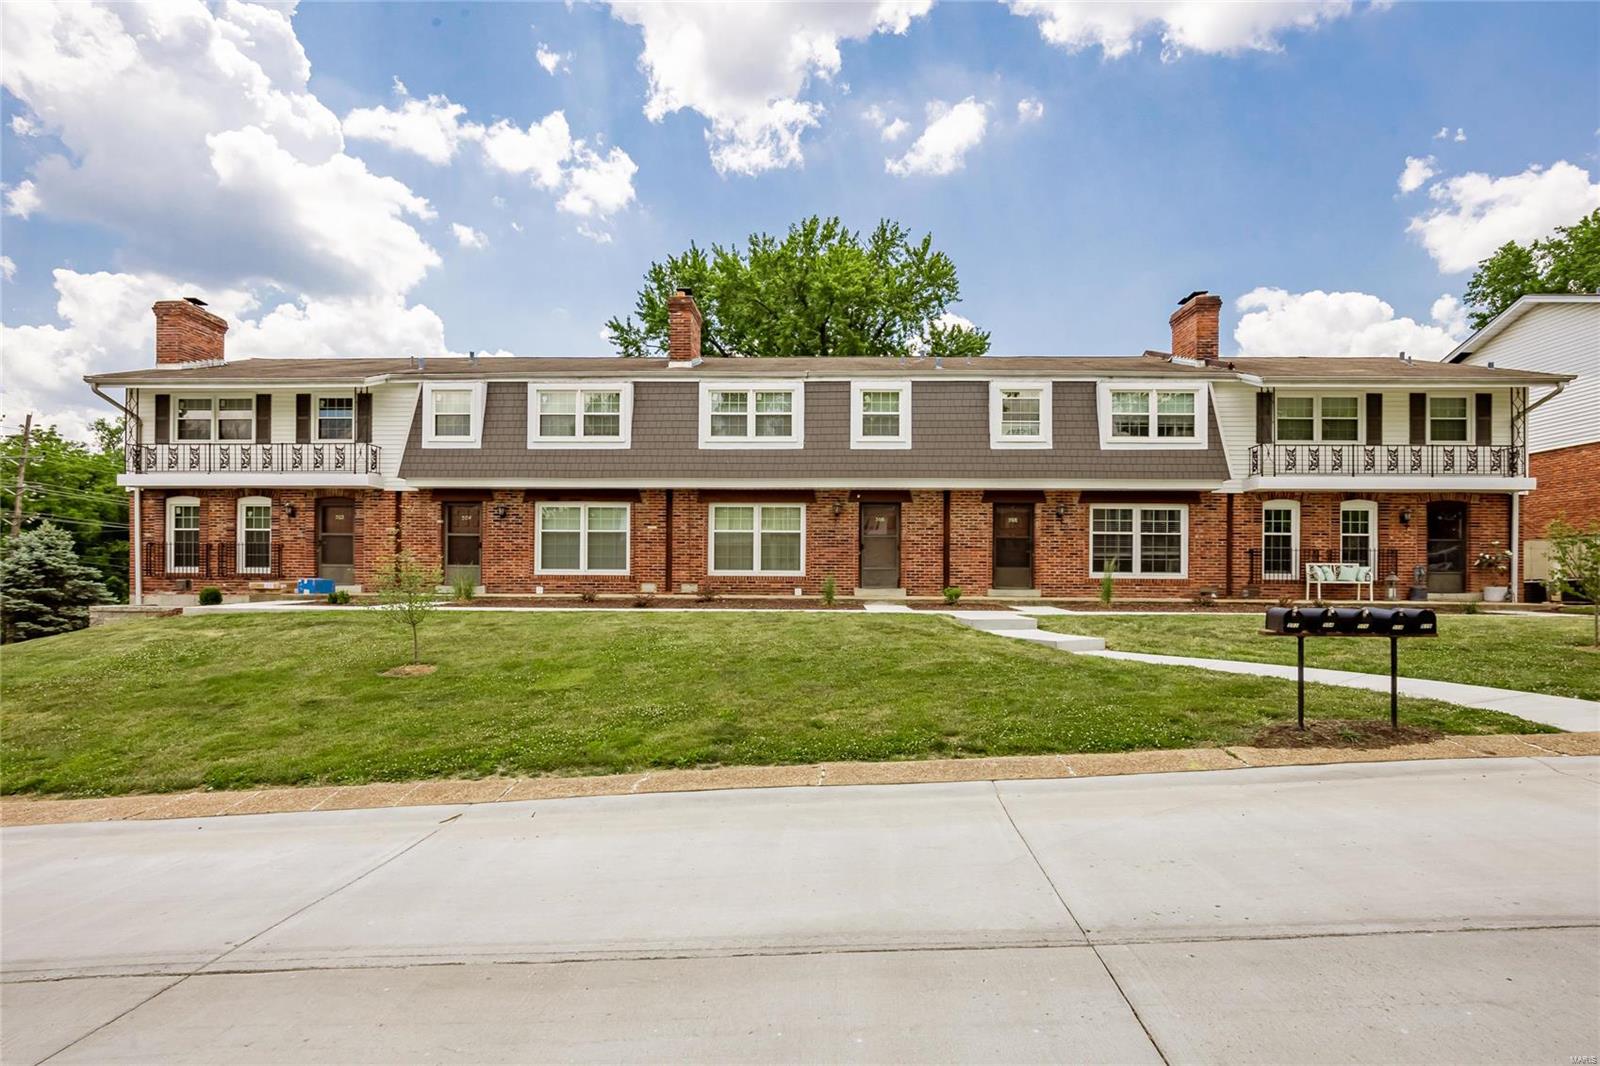 View Chesterfield, MO 63017 townhome